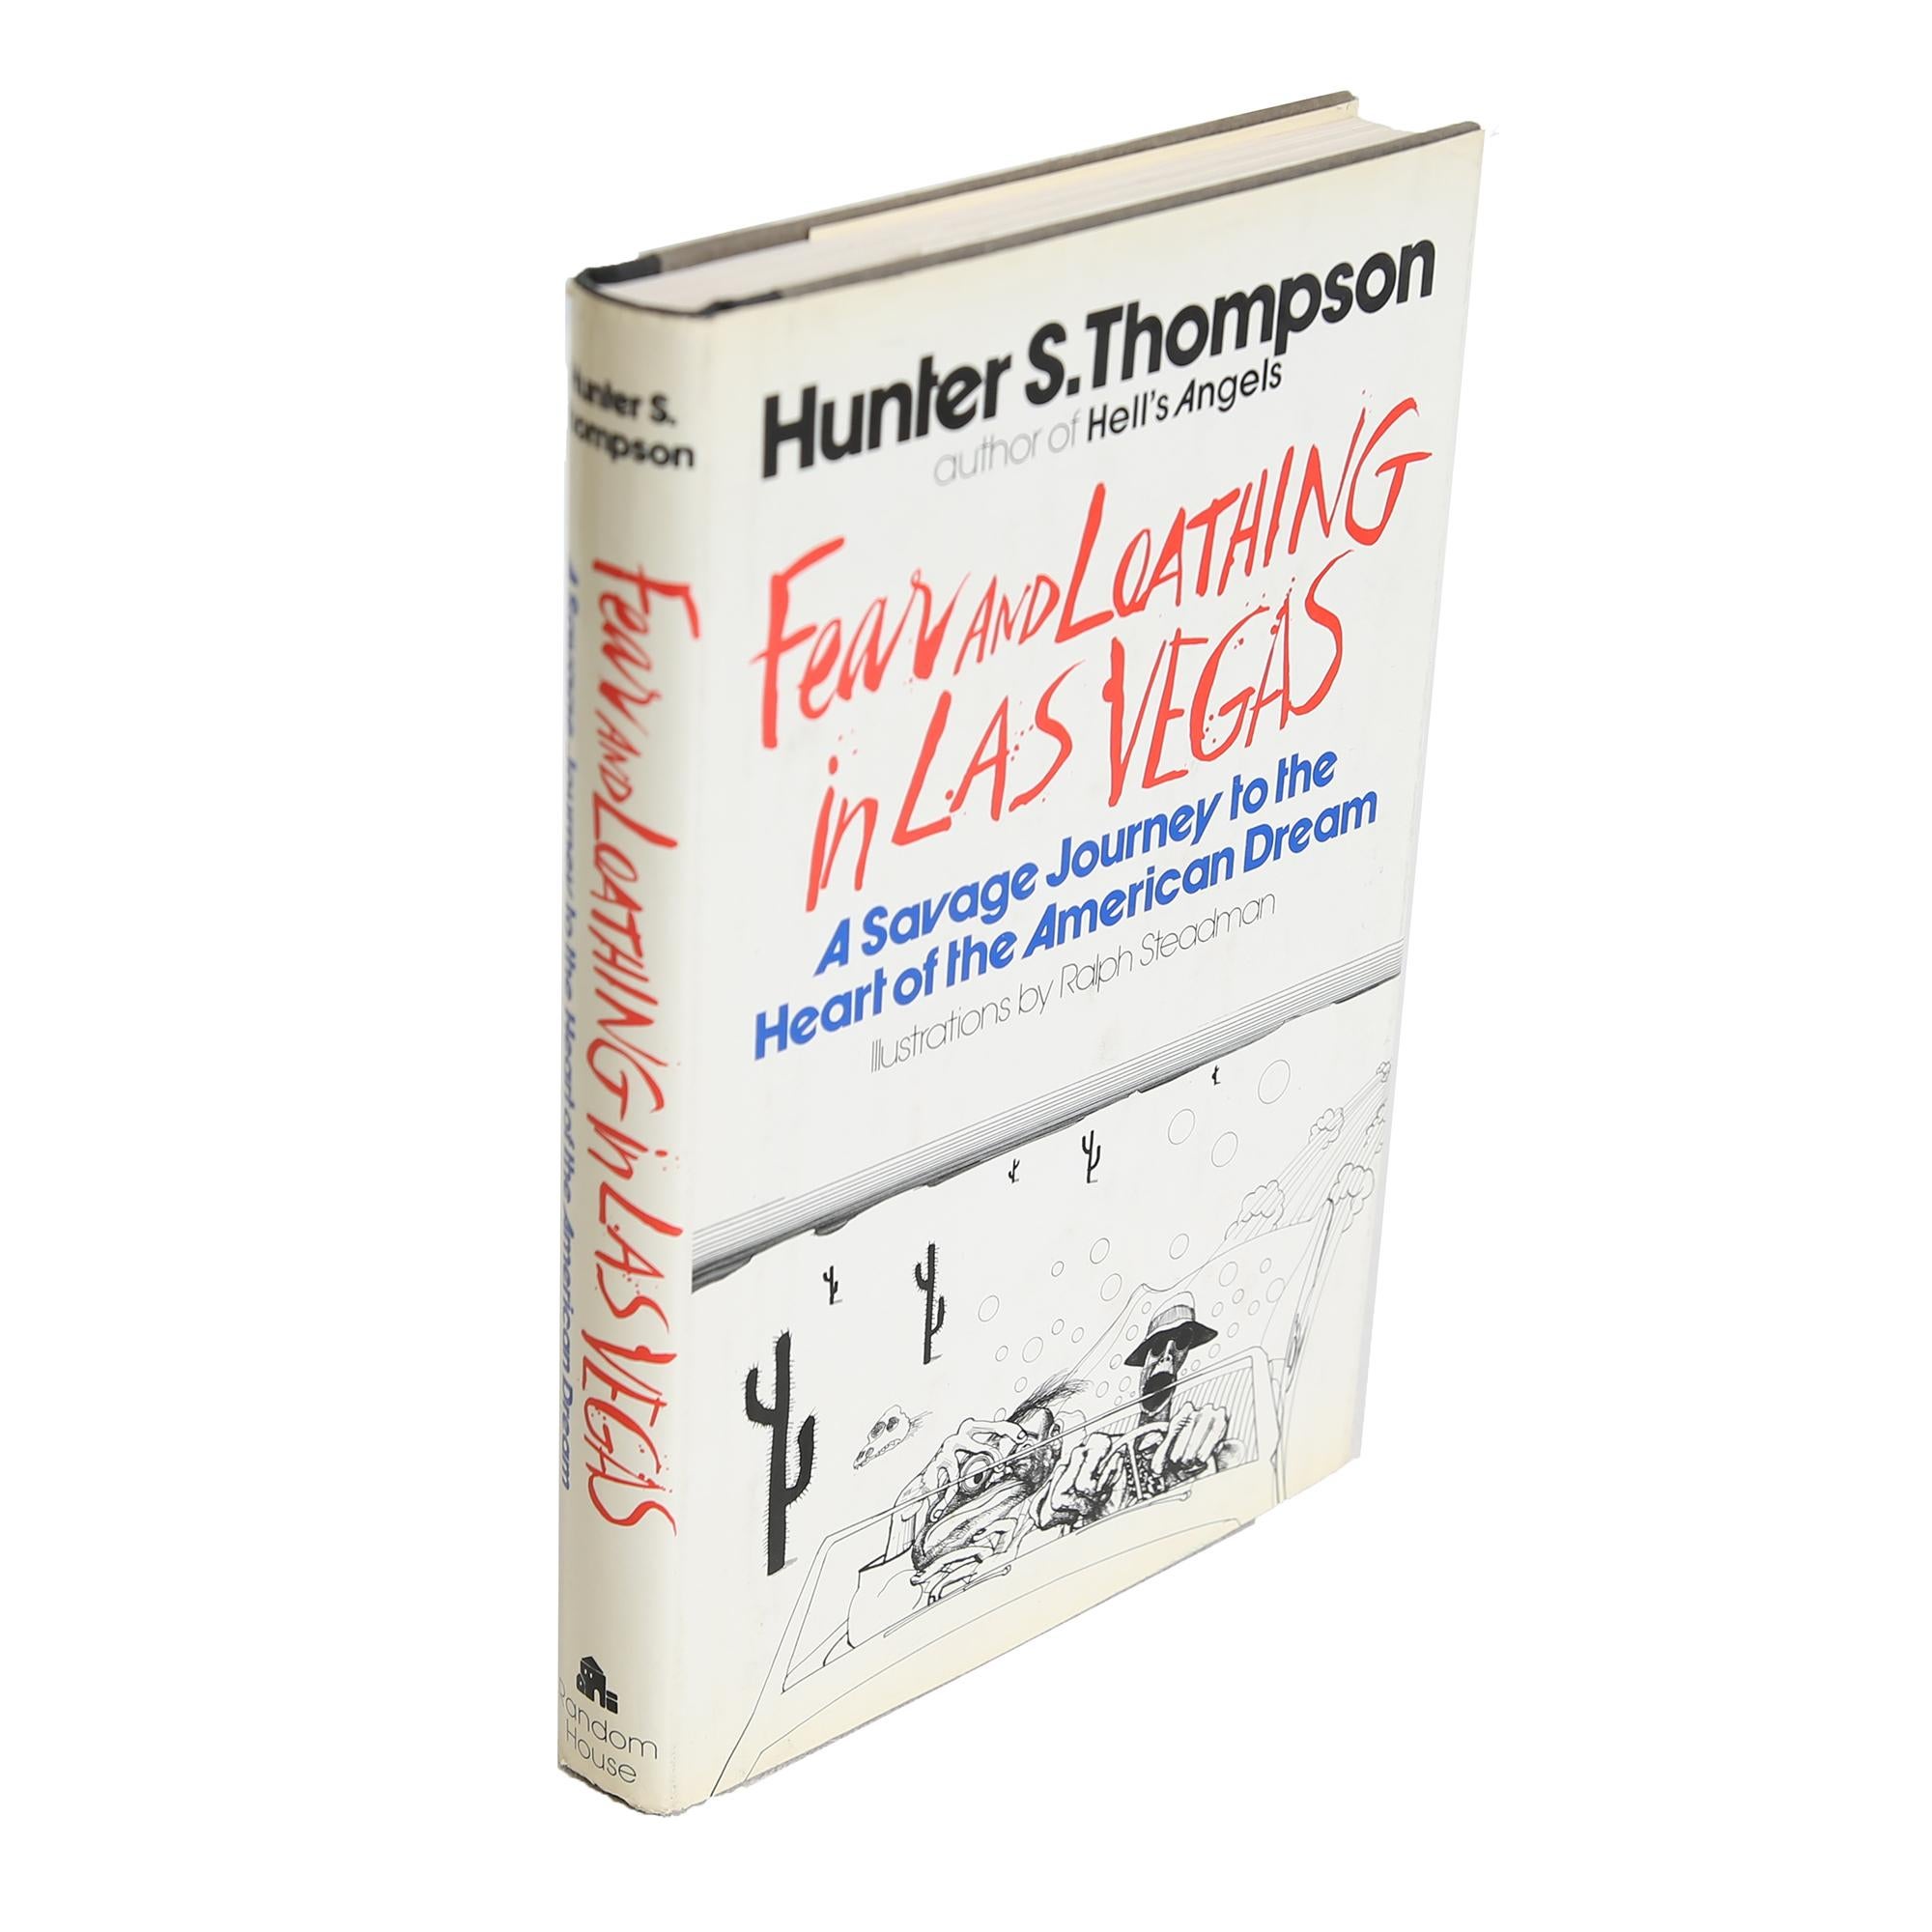 Hunter S. Thompson's Fear and Loathing in Las Vegas, First Edition 1971